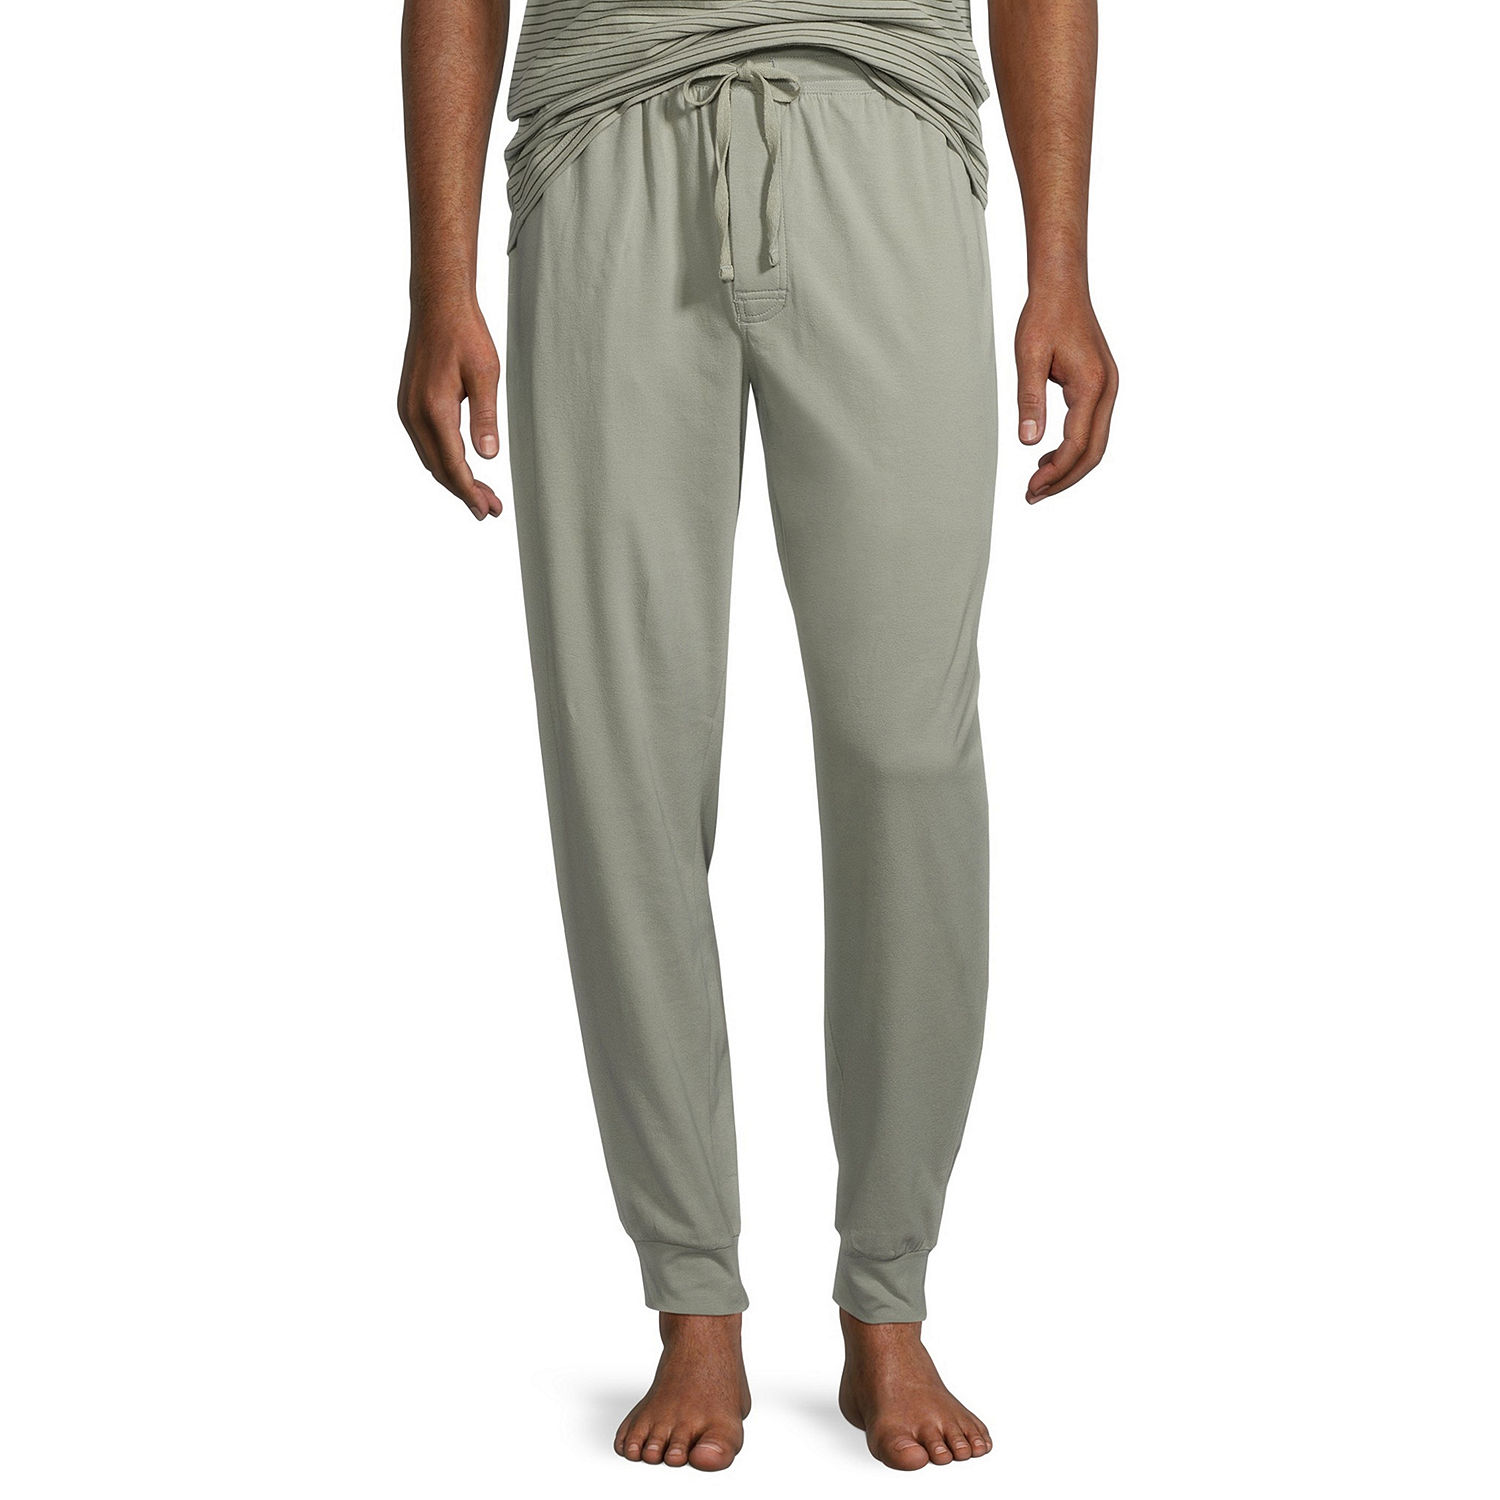 Stafford Super Soft Mens Pajama Pants - JCPenney